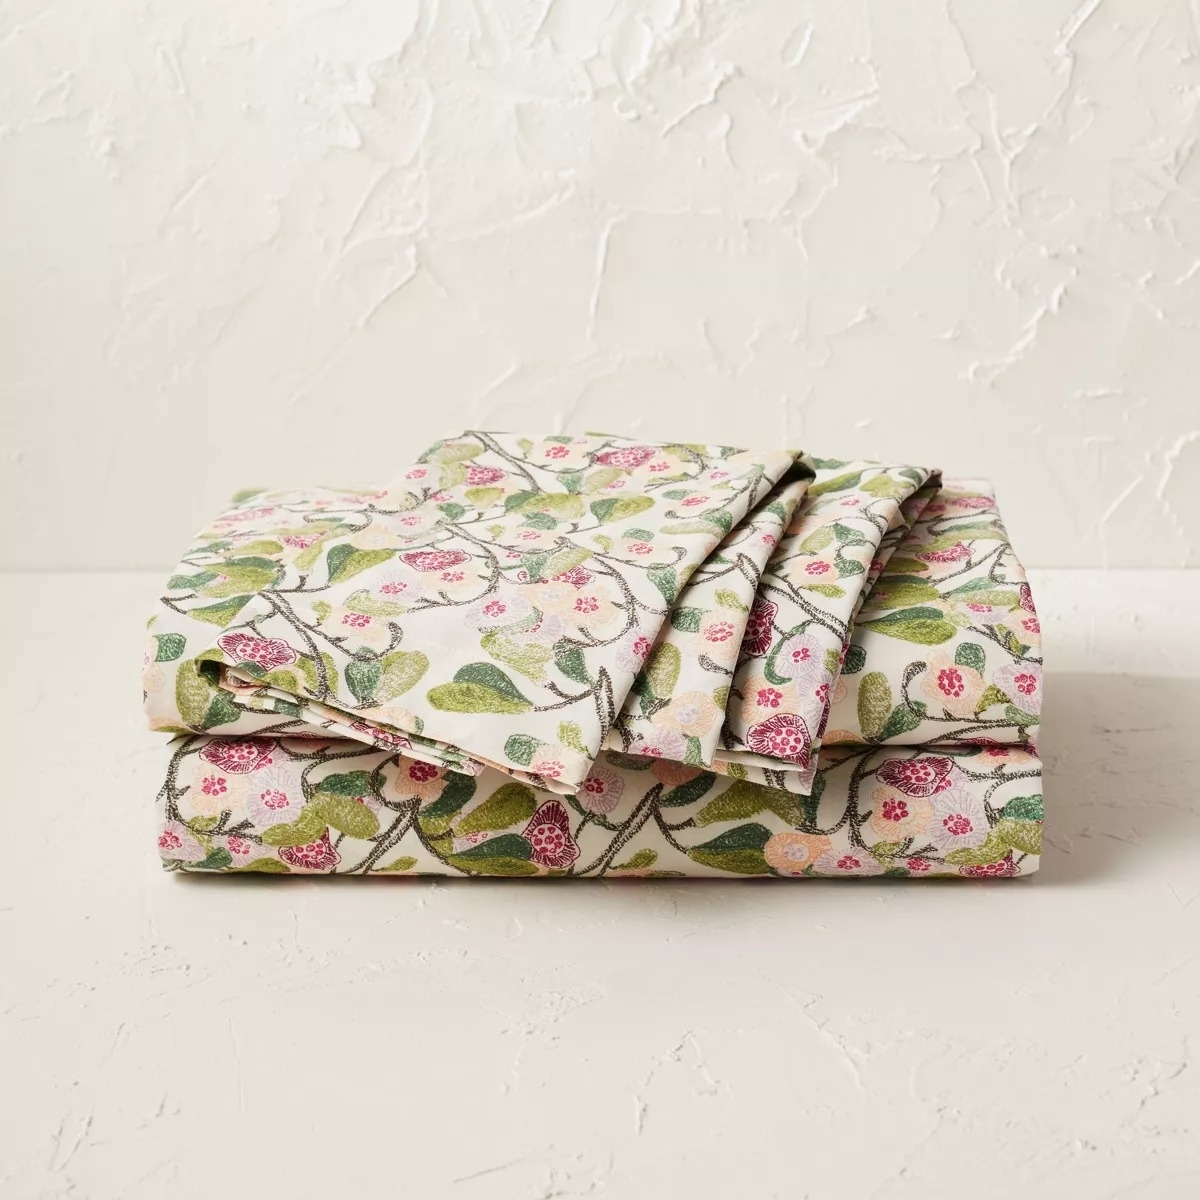 Floral patterned bedding set folded on a textured surface